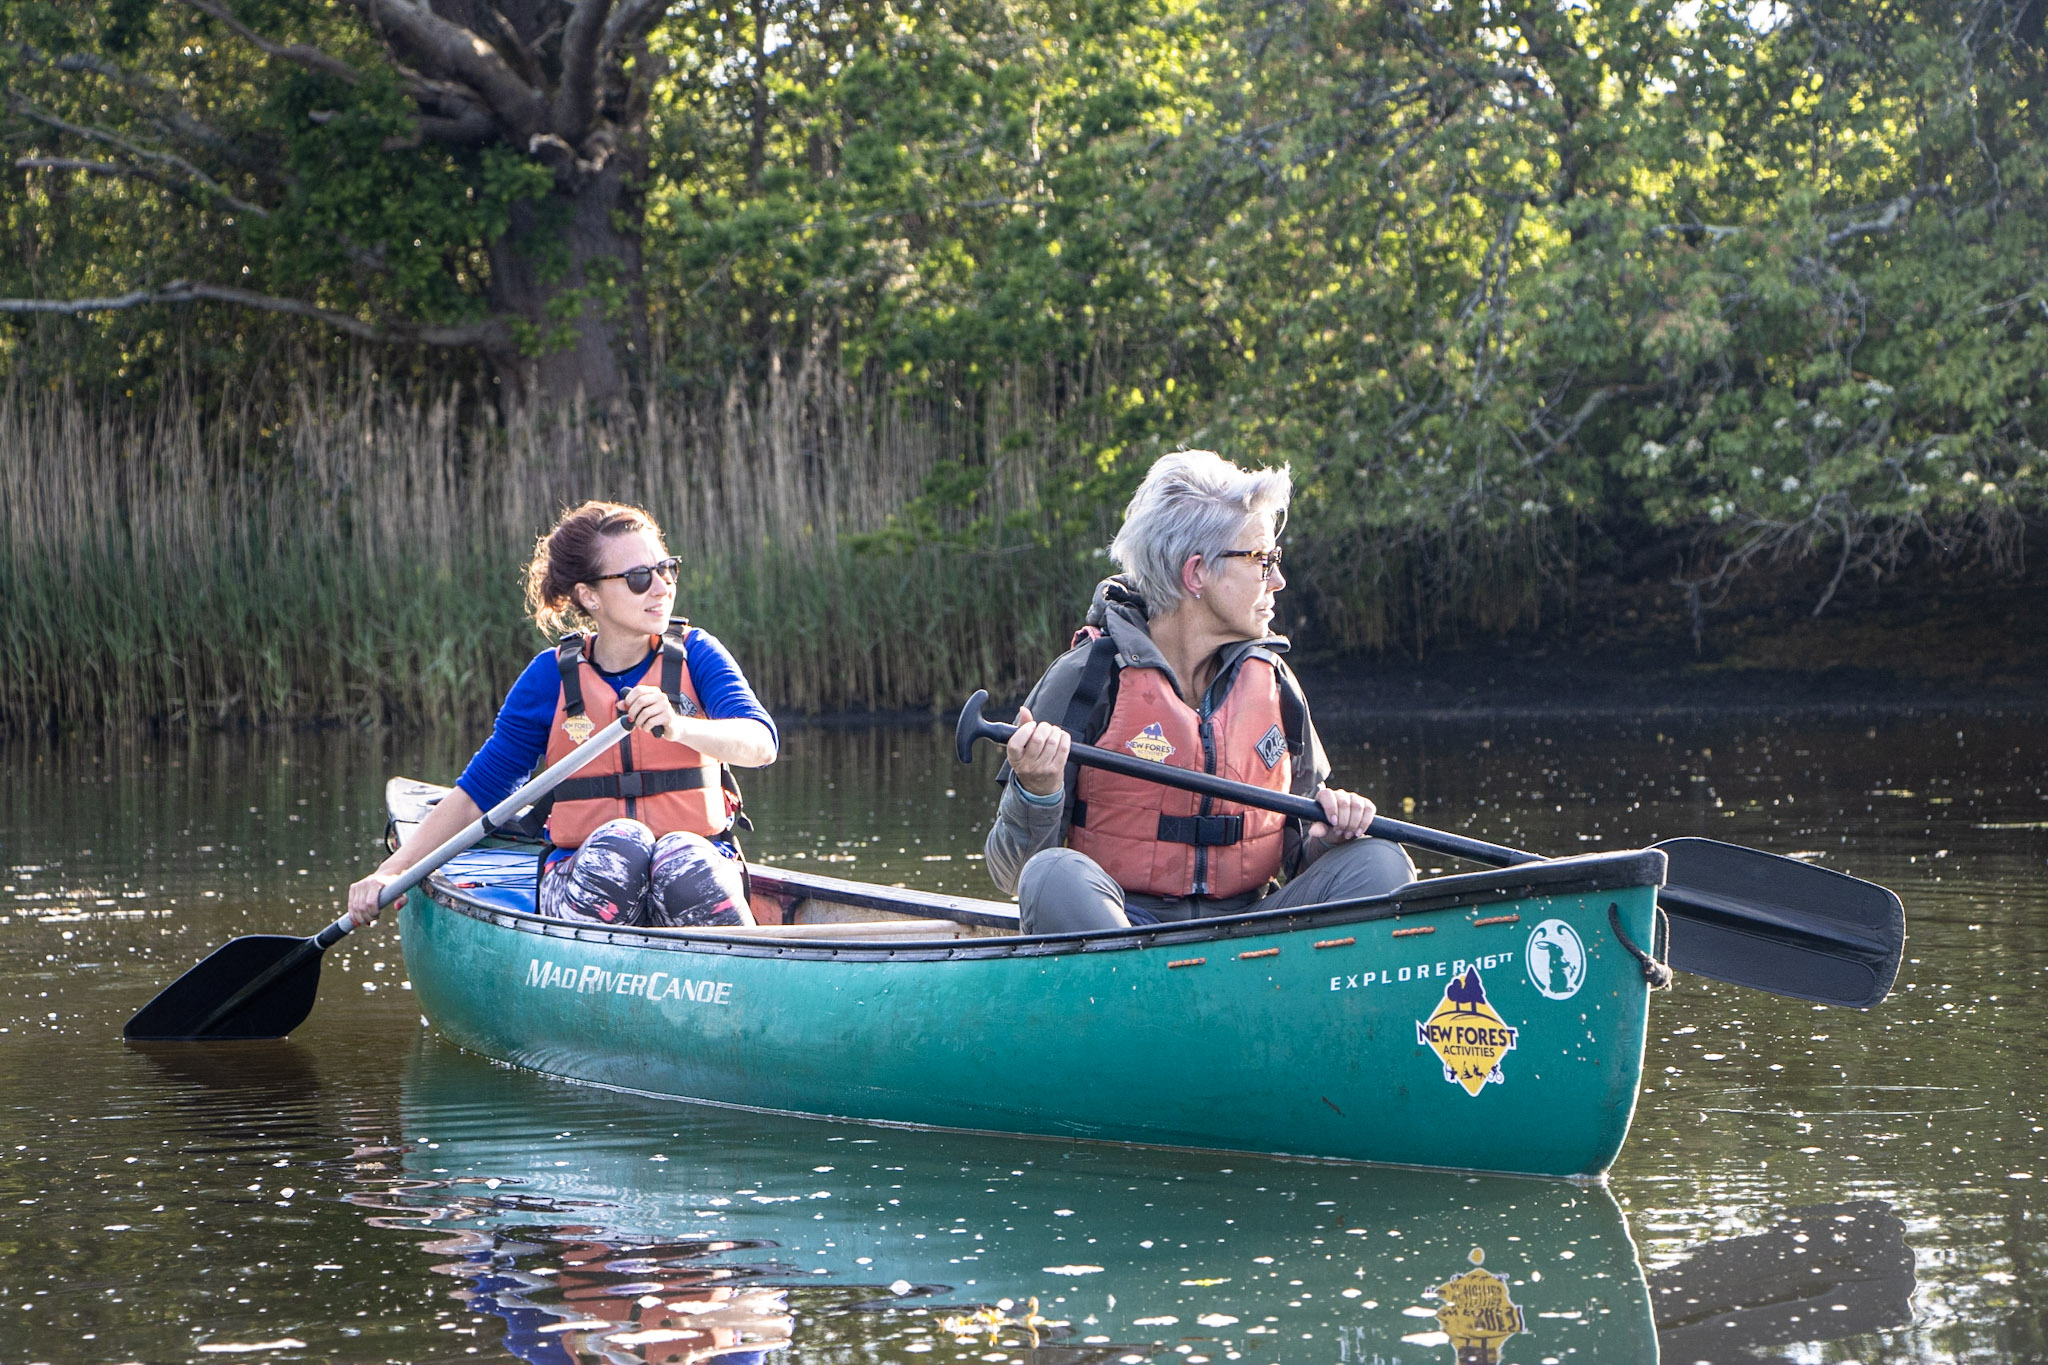 A mother and daughter enjoying a canoeing tour on the Beaulieu River